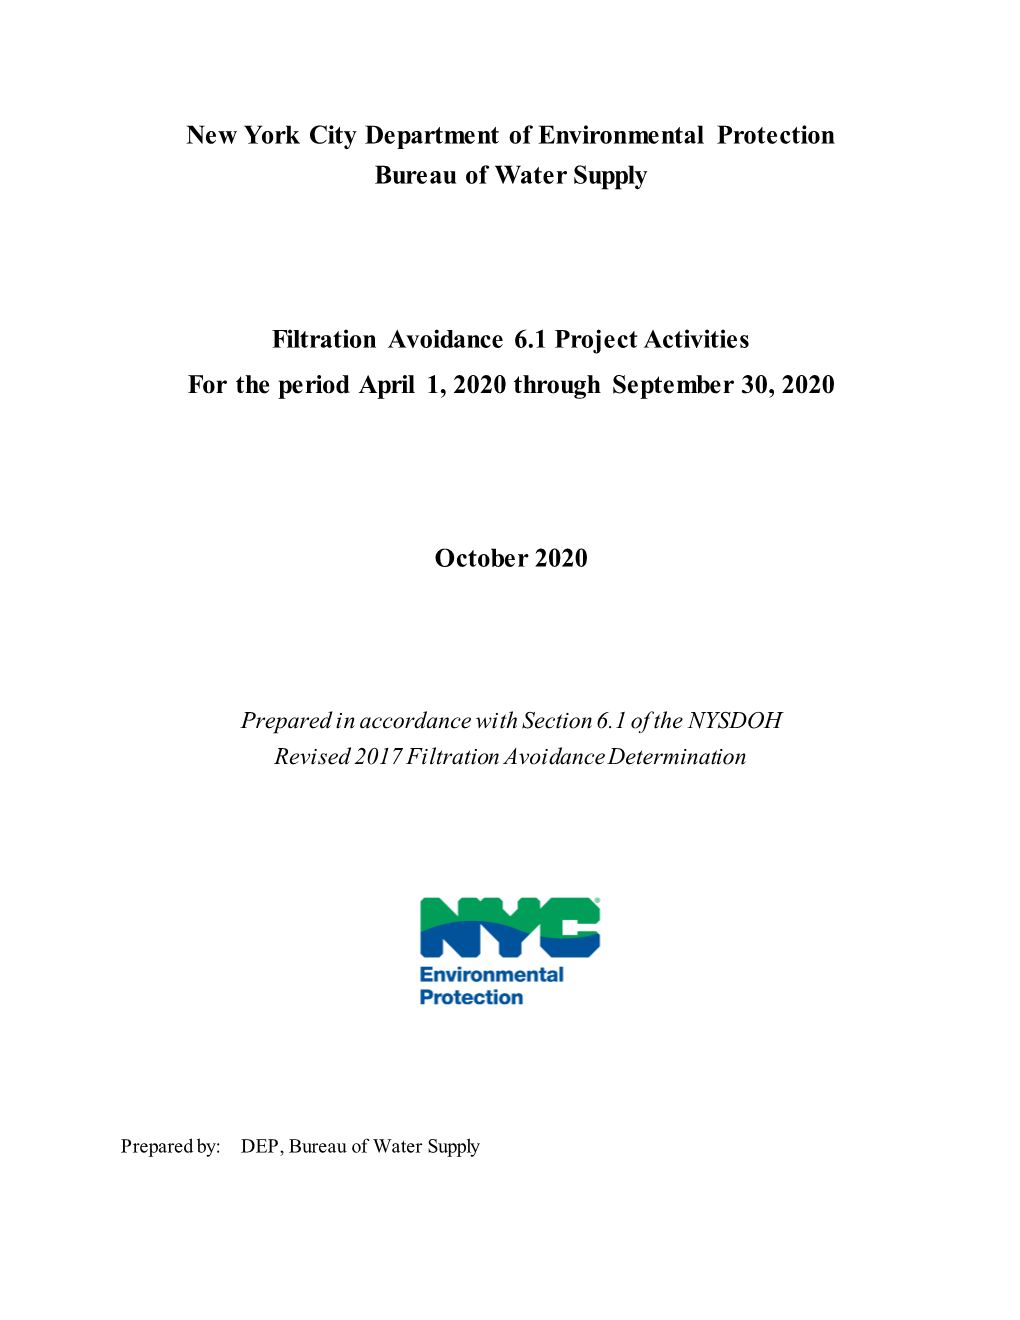 New York City Department of Environmental Protection Bureau of Water Supply Filtration Avoidance 6.1 Project Activities For